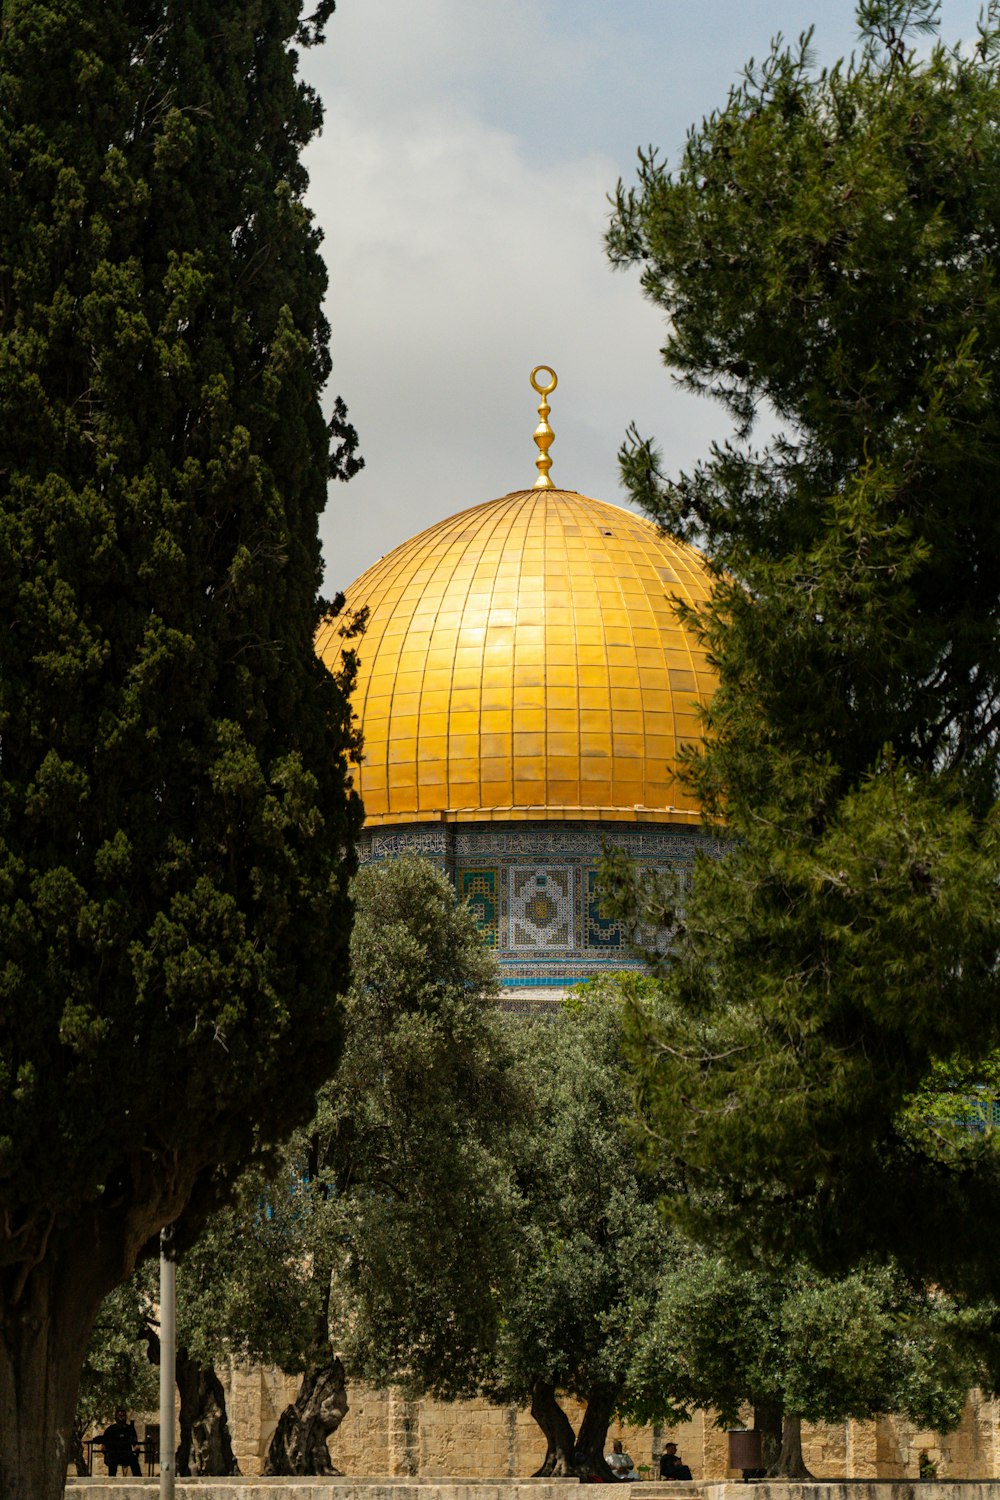 the dome of a building with a golden top